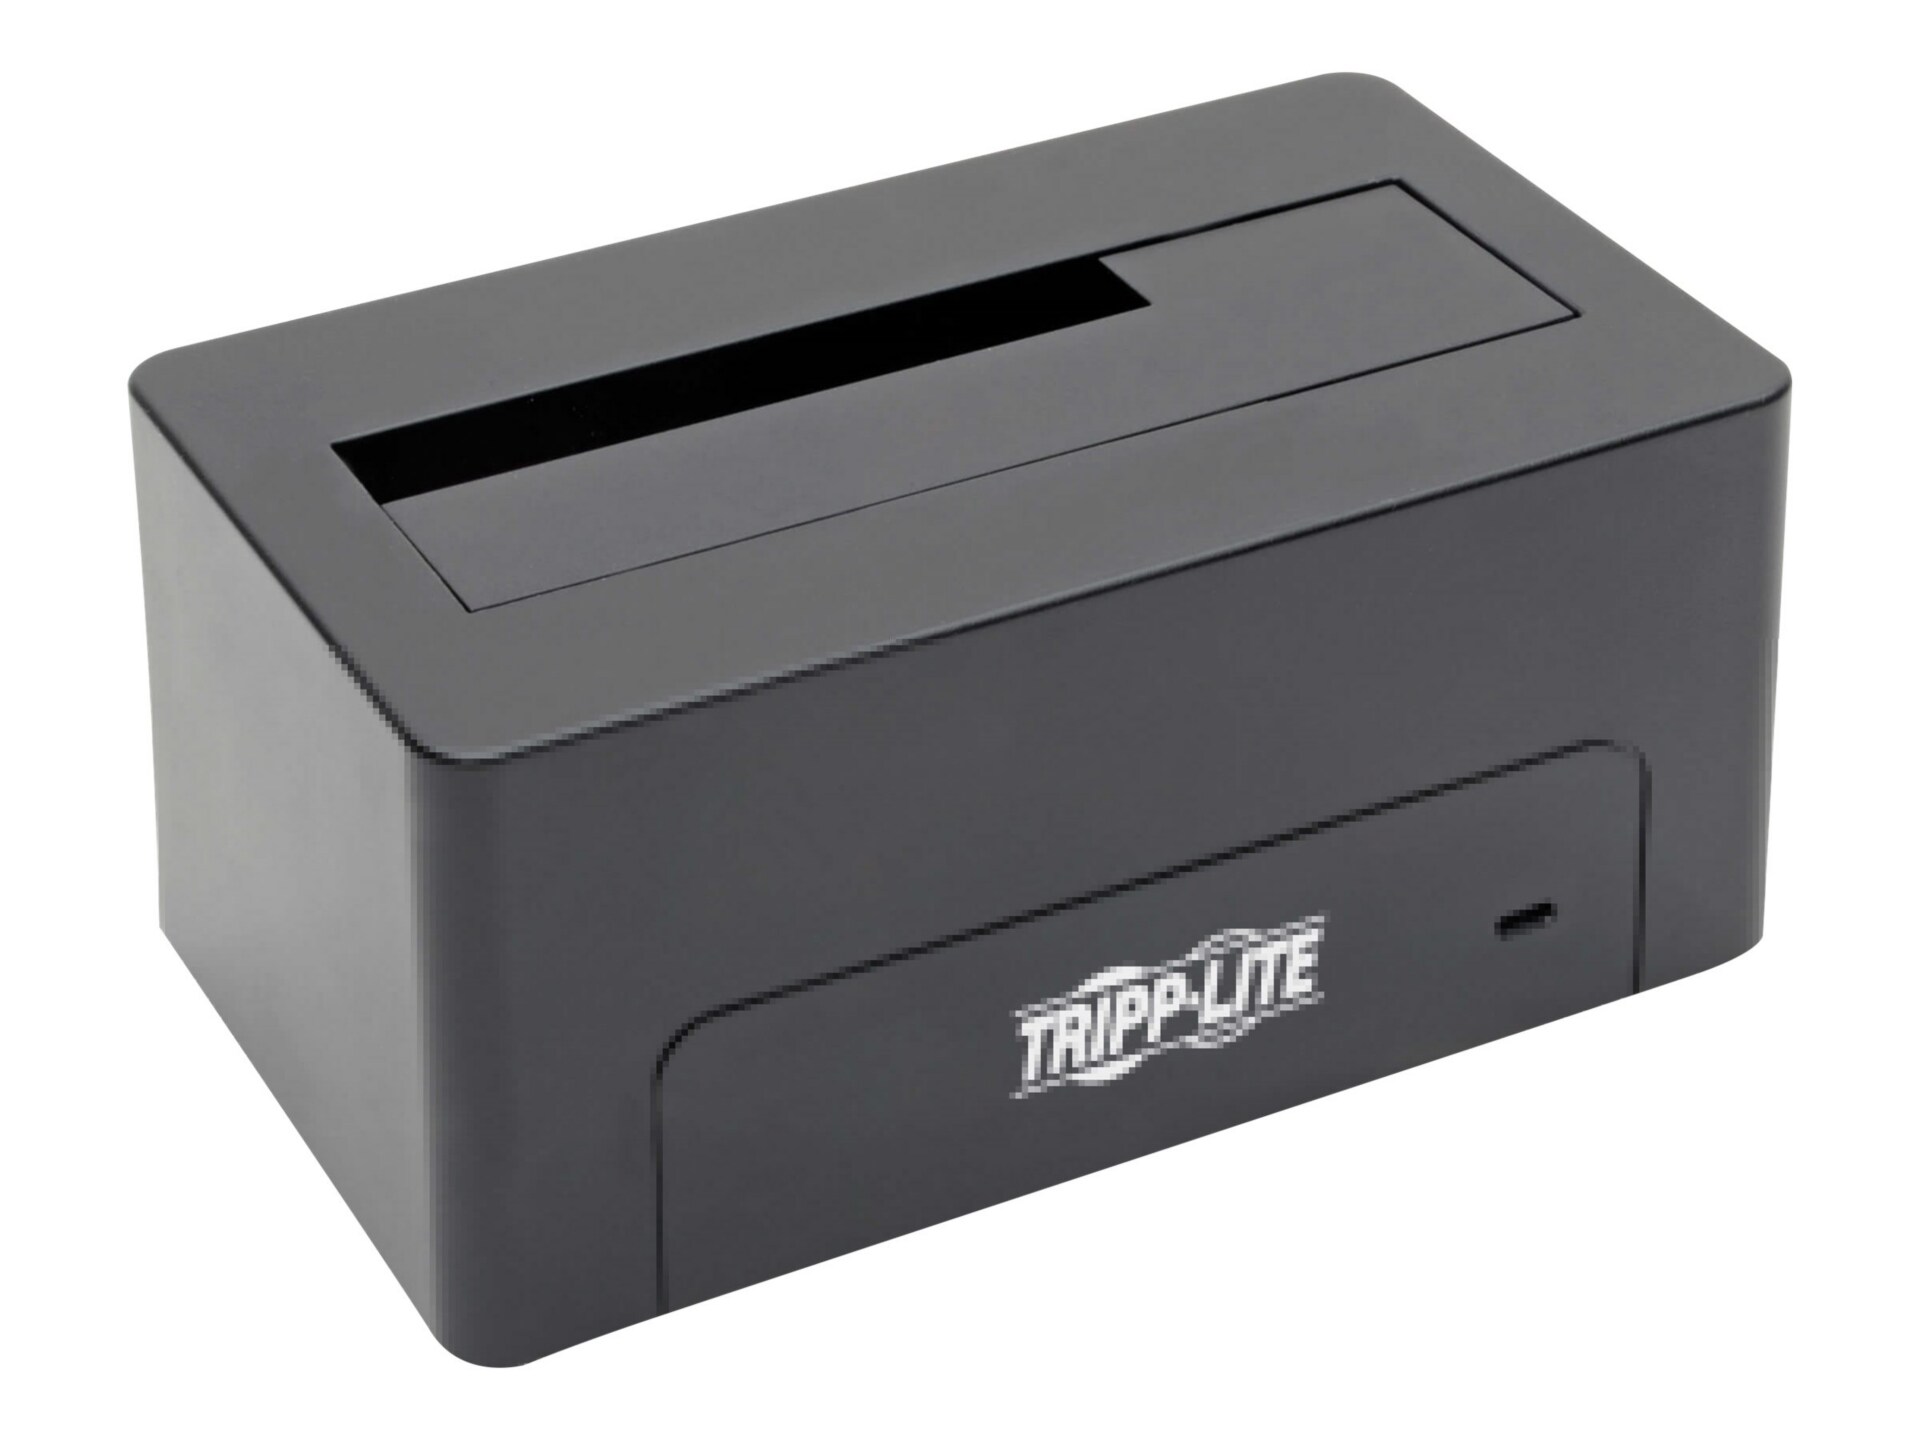 Tripp Lite USB 3.1 Type-C to SATA Quick Dock, 10 Gbps, 2.5 and 3.5 in. HDD/SDD, Thunderbolt 3 Compatible - HDD docking